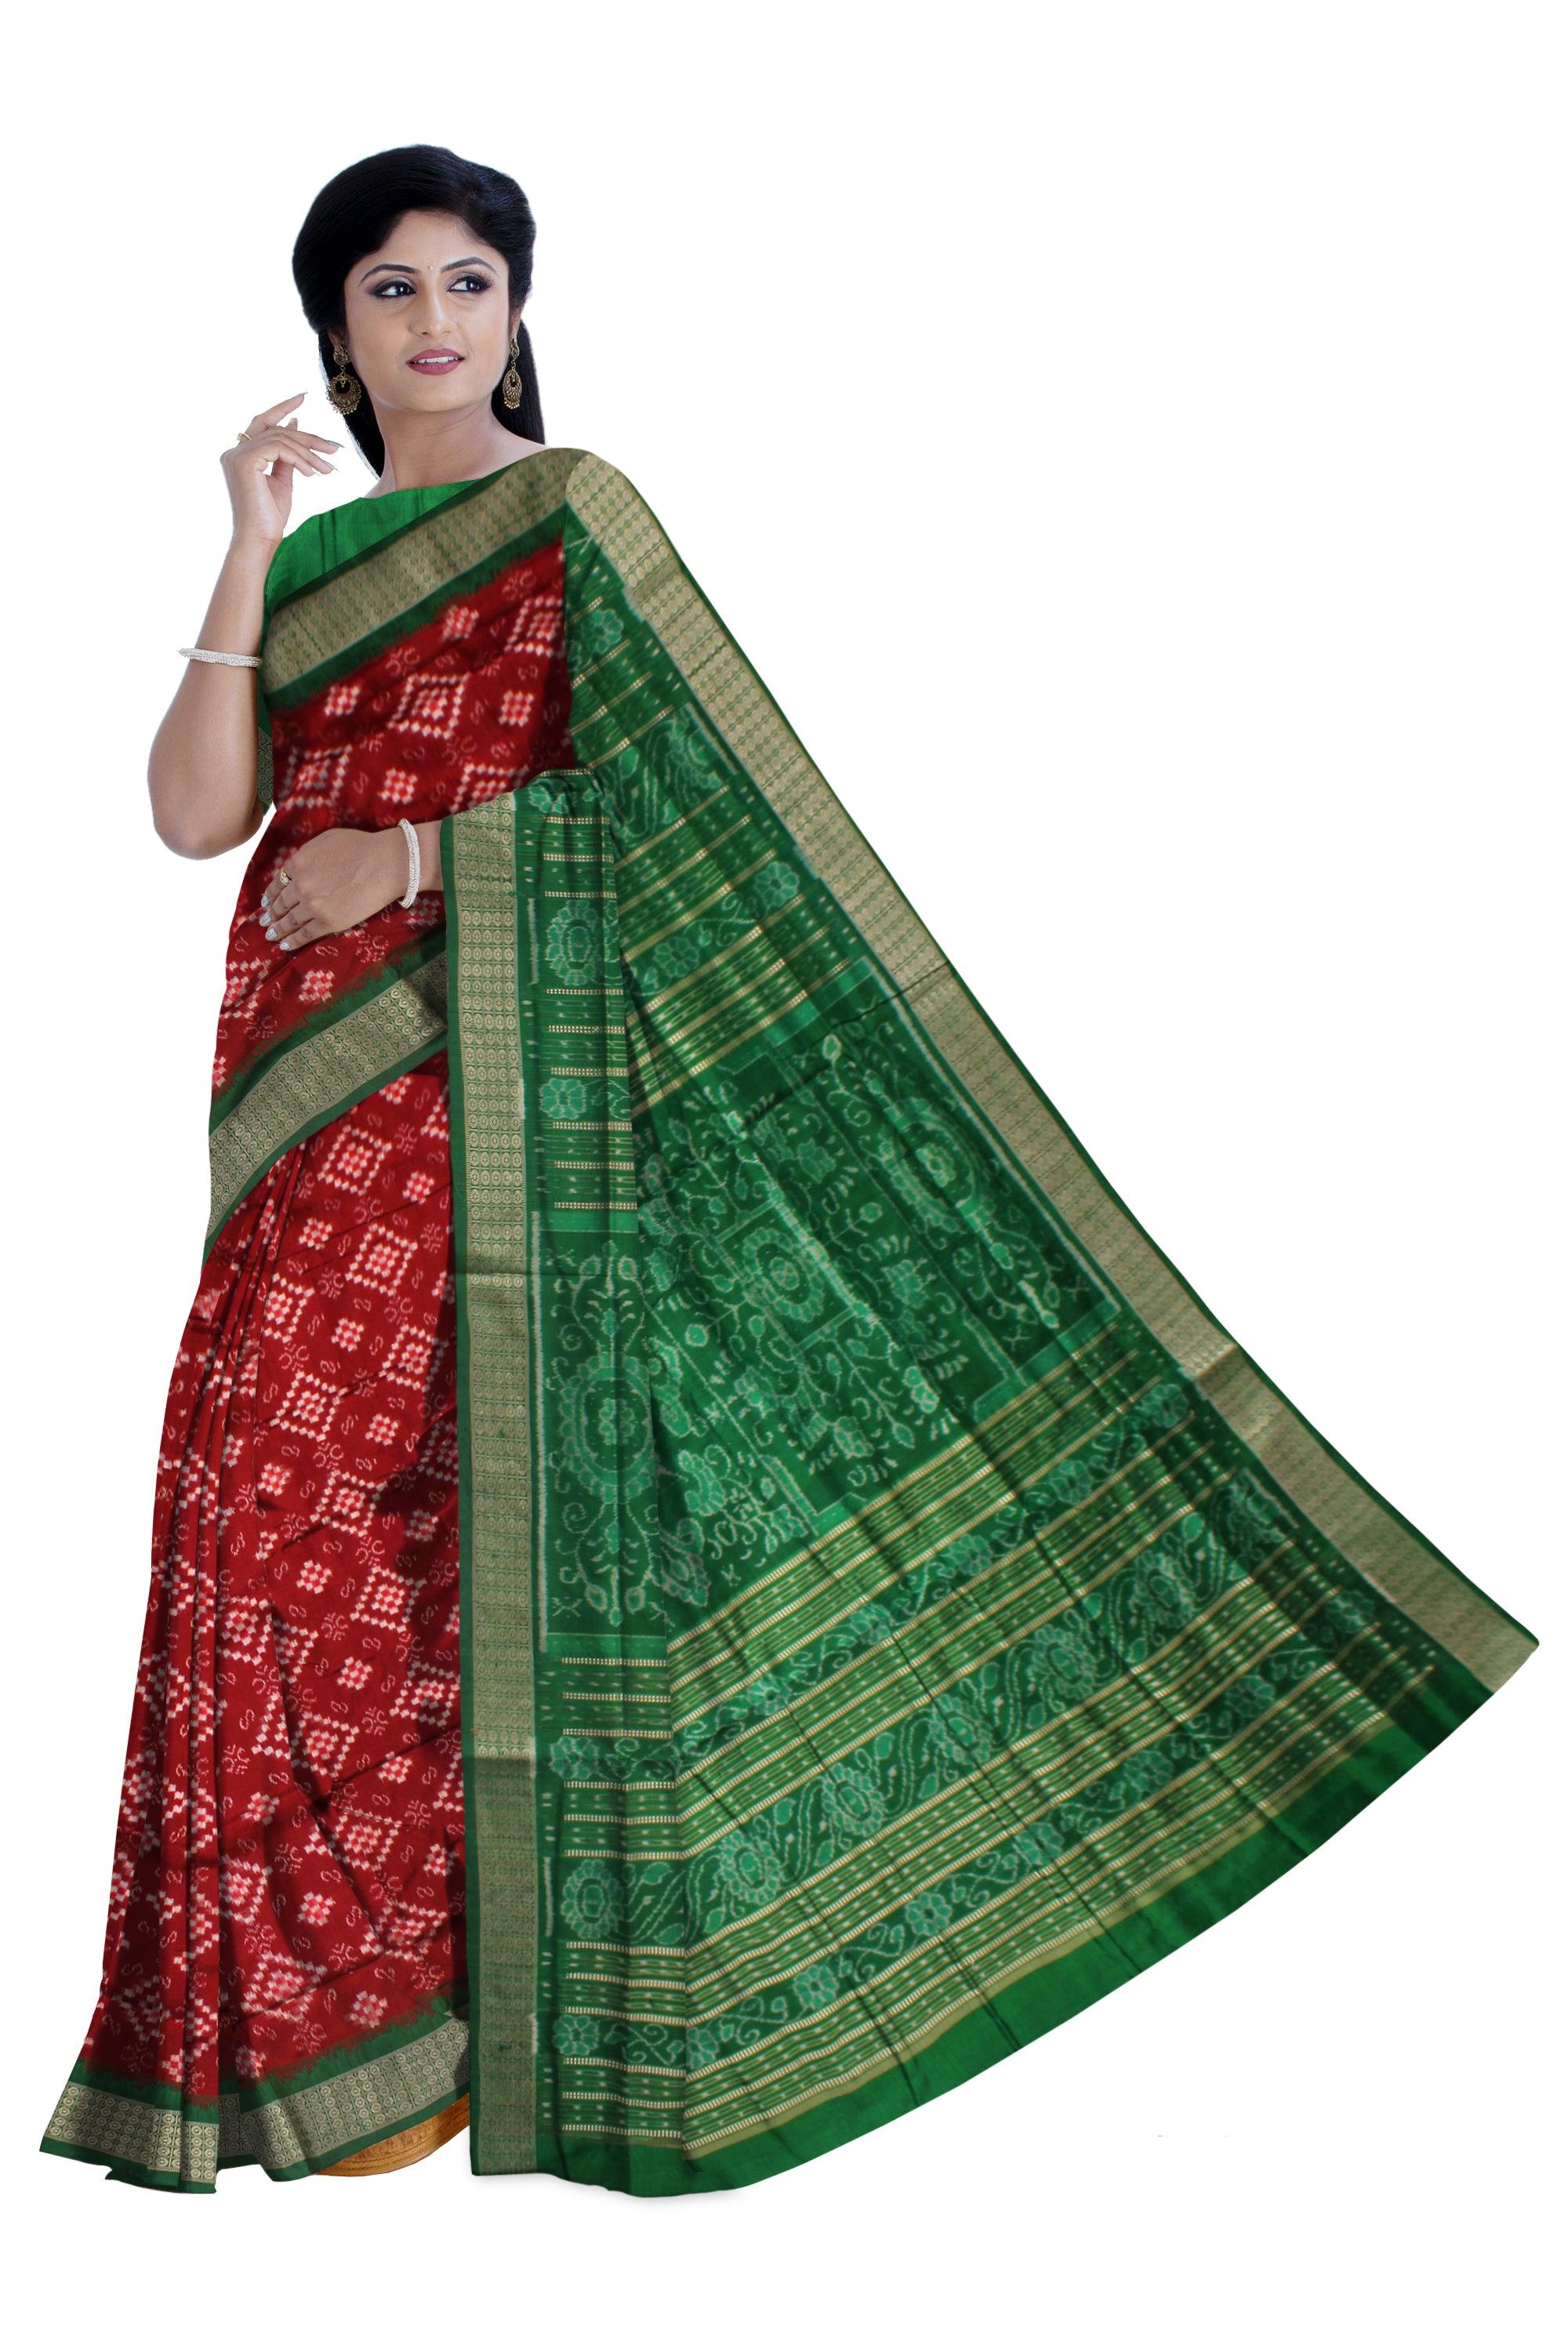 NEW COLLECTION PASAPALI PURE PATA SAREE IN MAROON AND GREEN COLOR BASE, WITH BLOUSE PIECE. - Koshali Arts & Crafts Enterprise